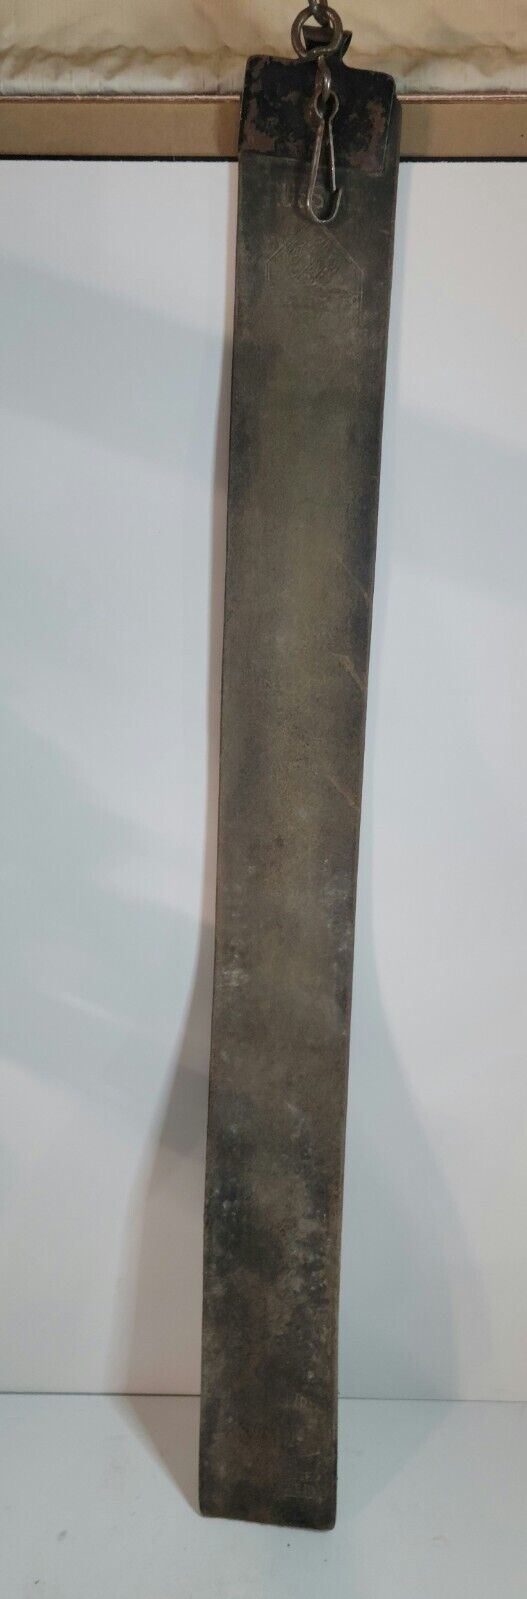 Primary image for Leather Strop Russian 24" VTG